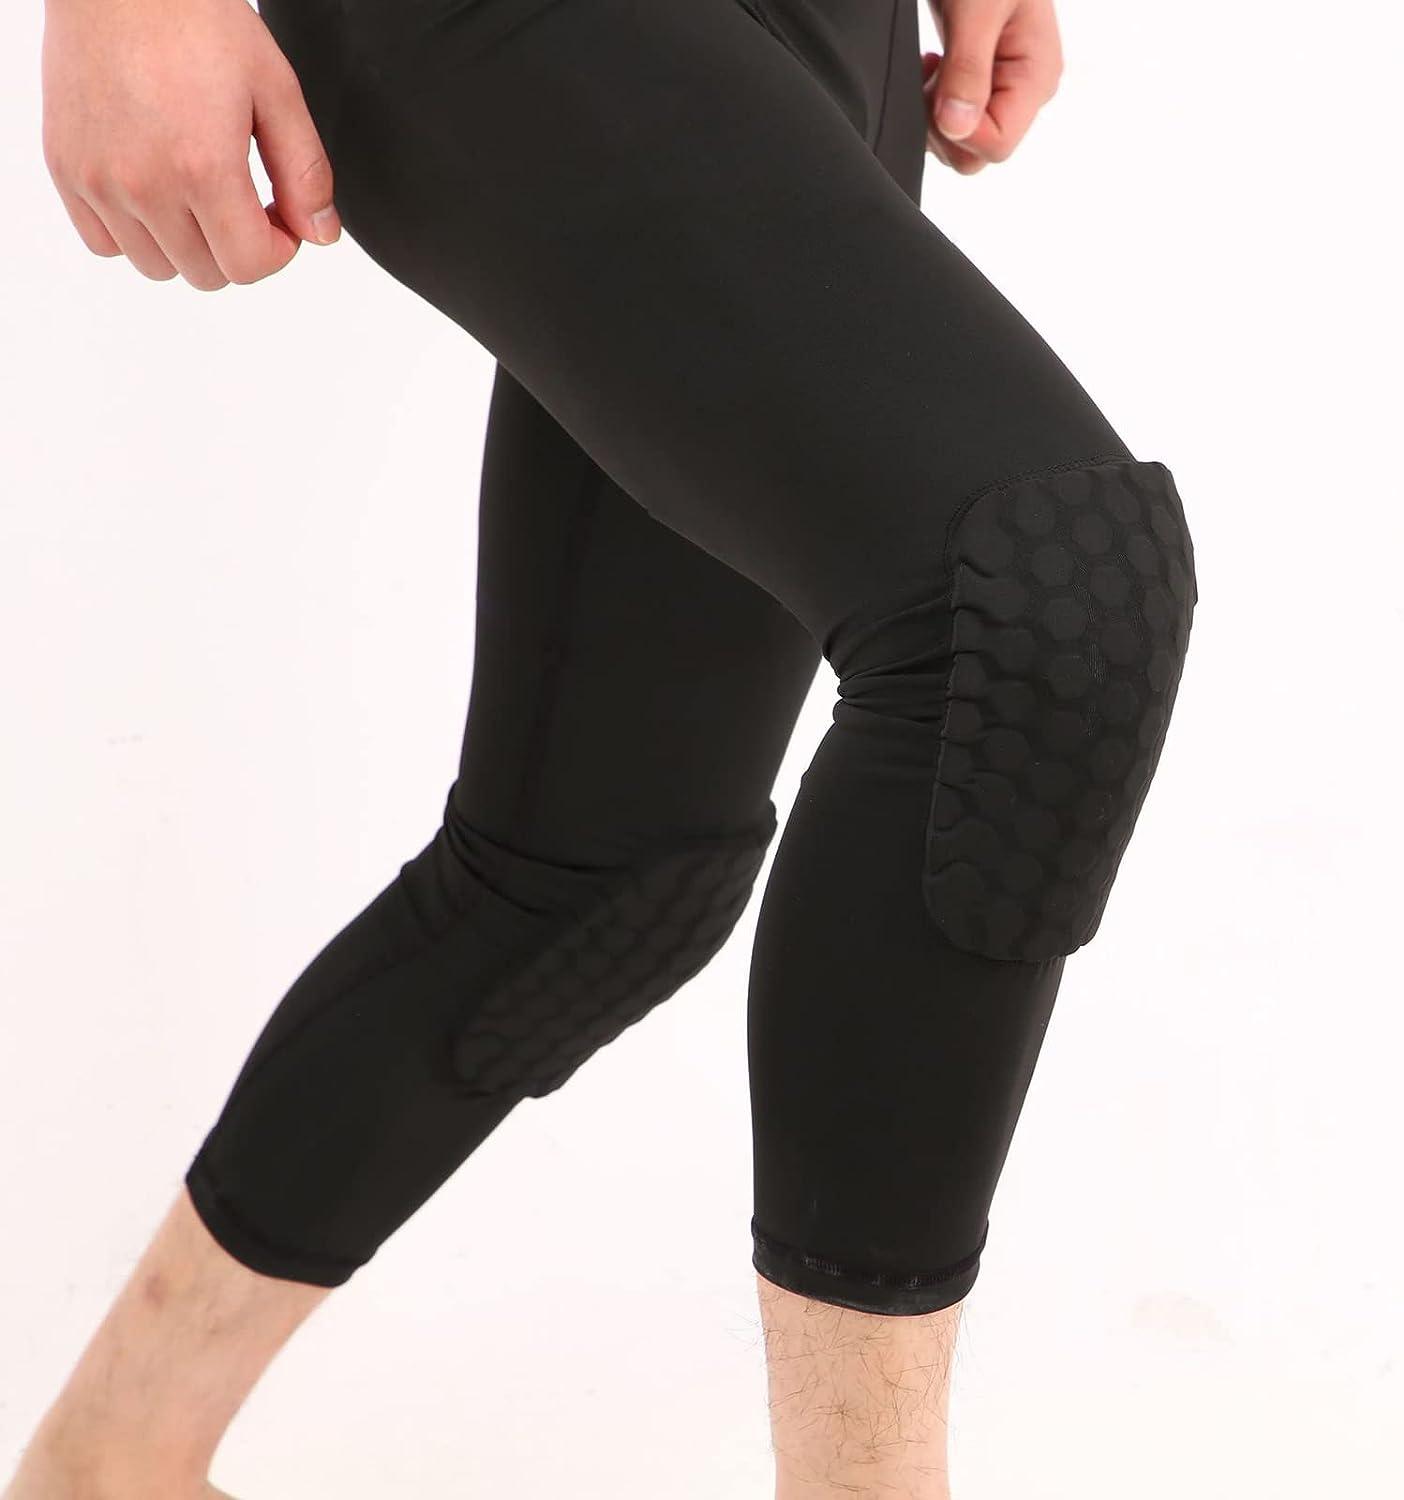 Men's Basketball Sports Tight Pants Compression Workout Leggings With Knee  Pads